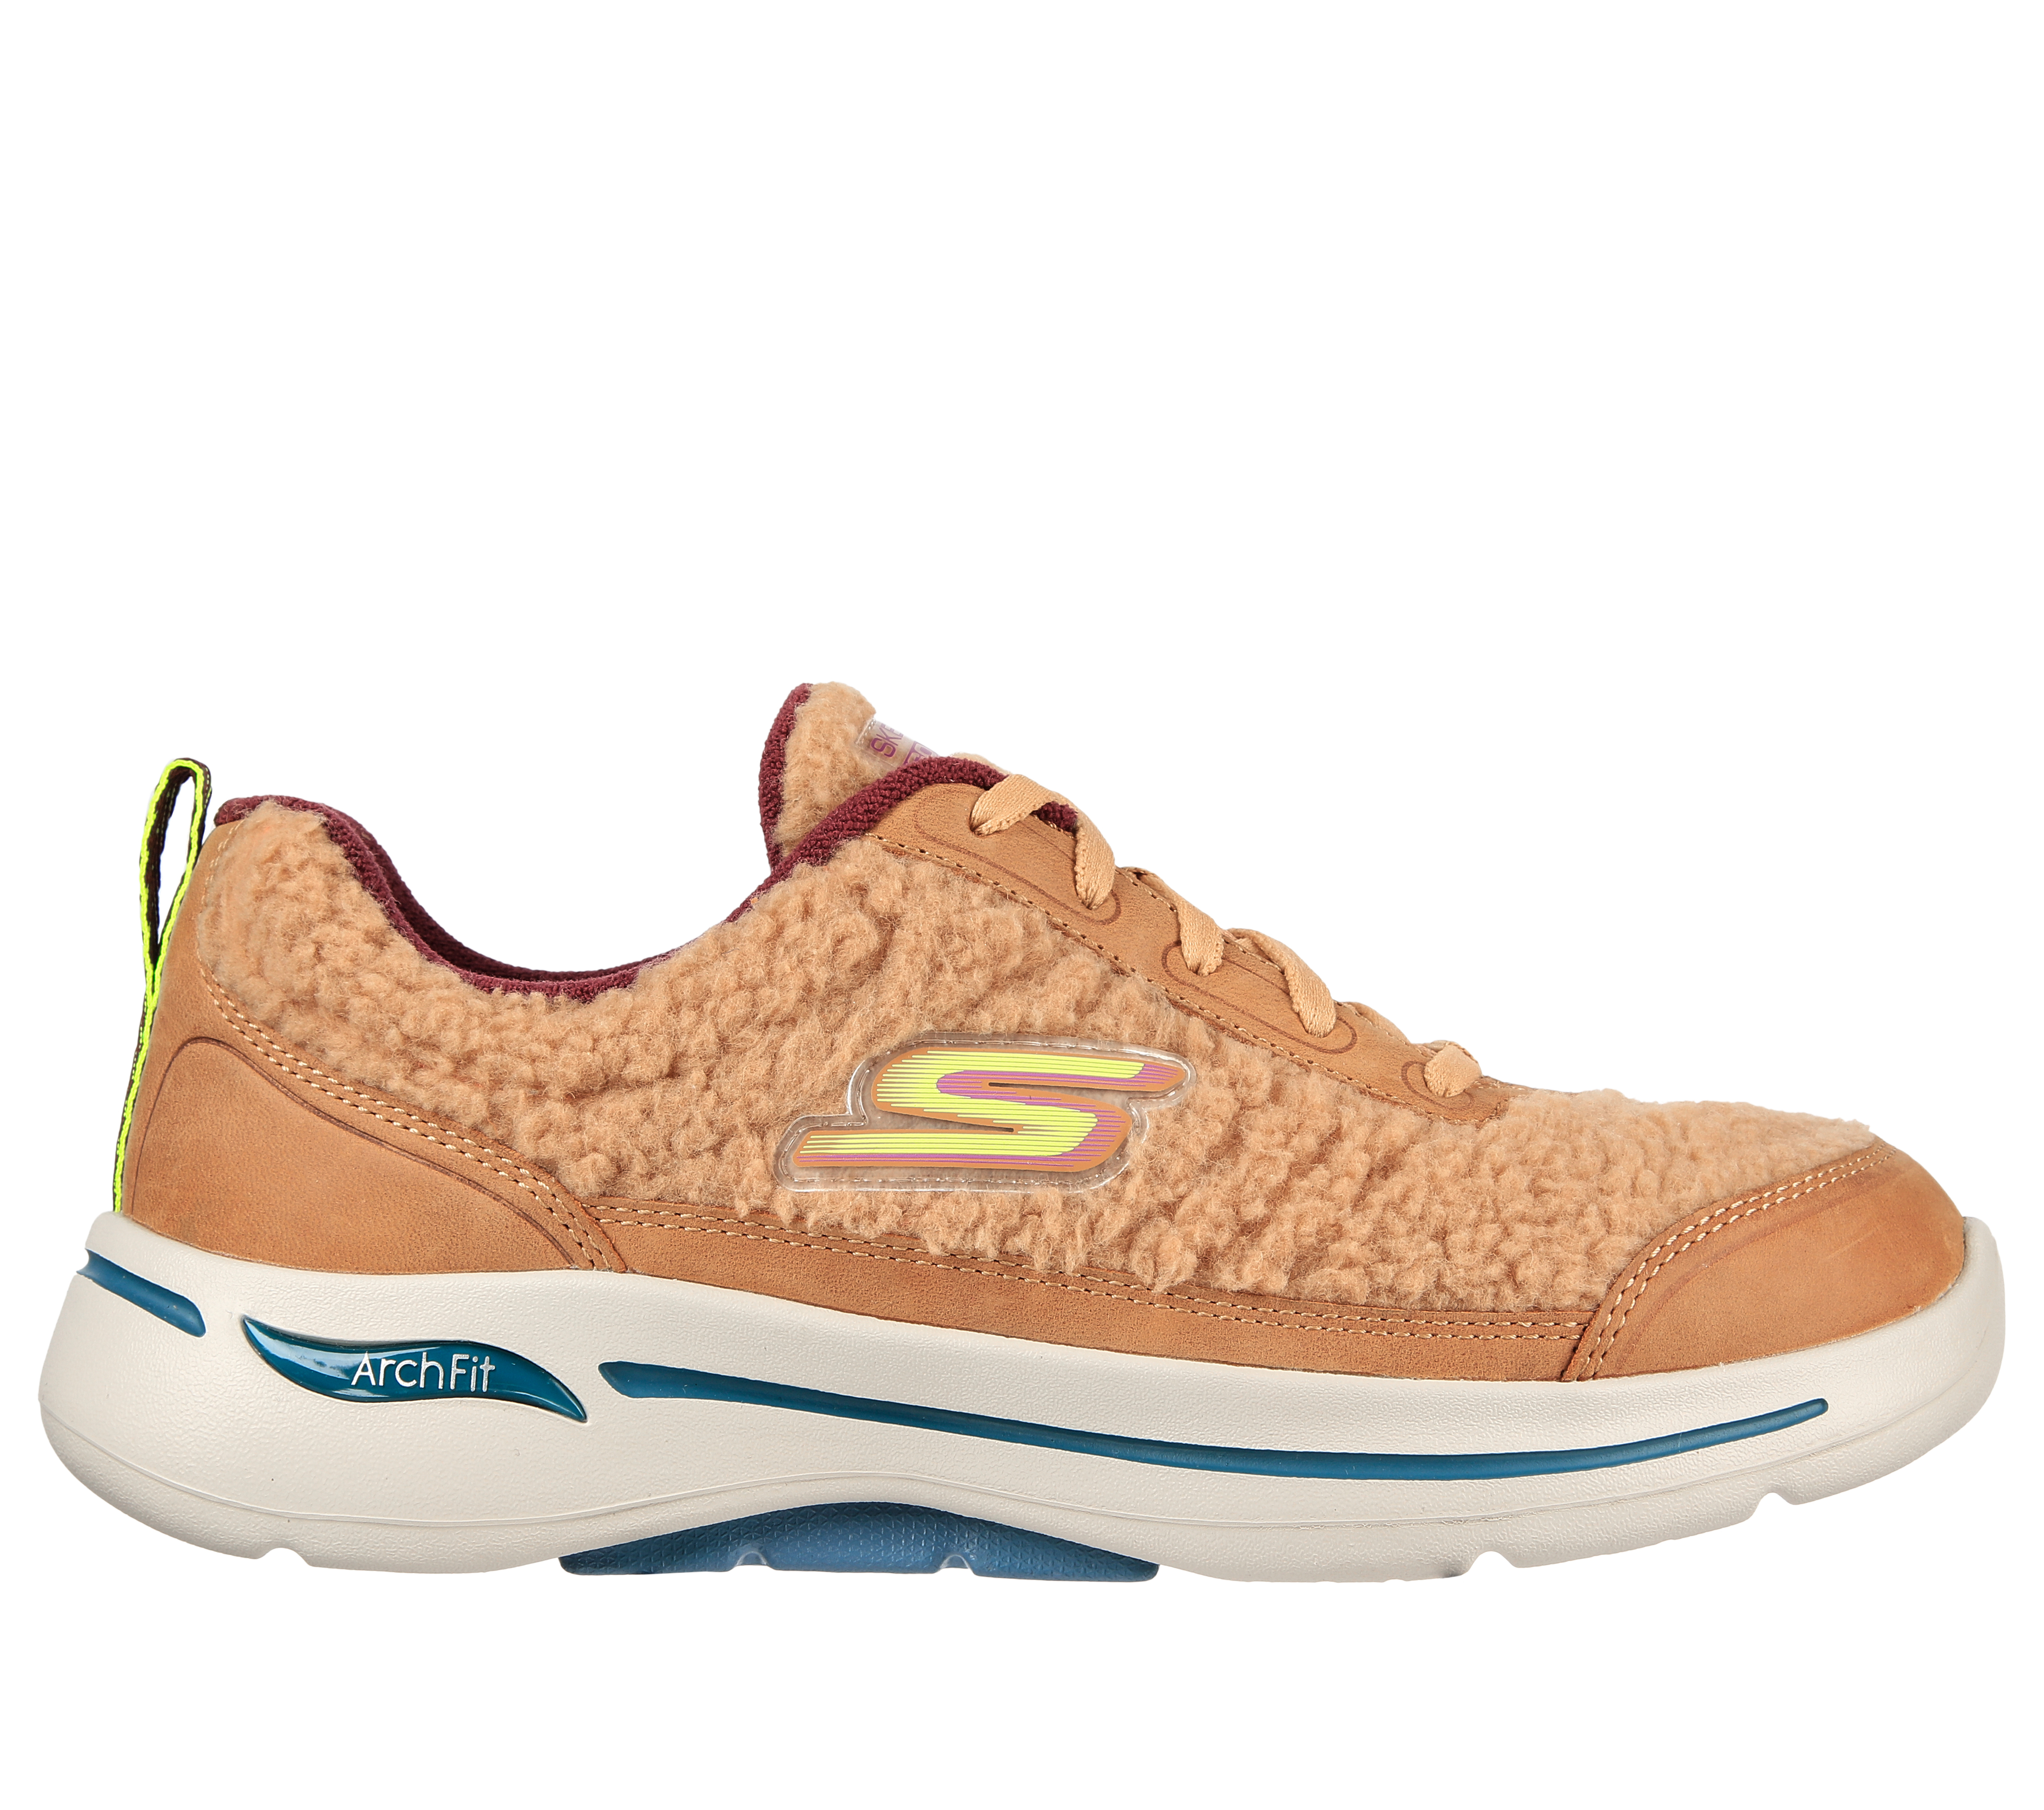 skechers mens shoes usa